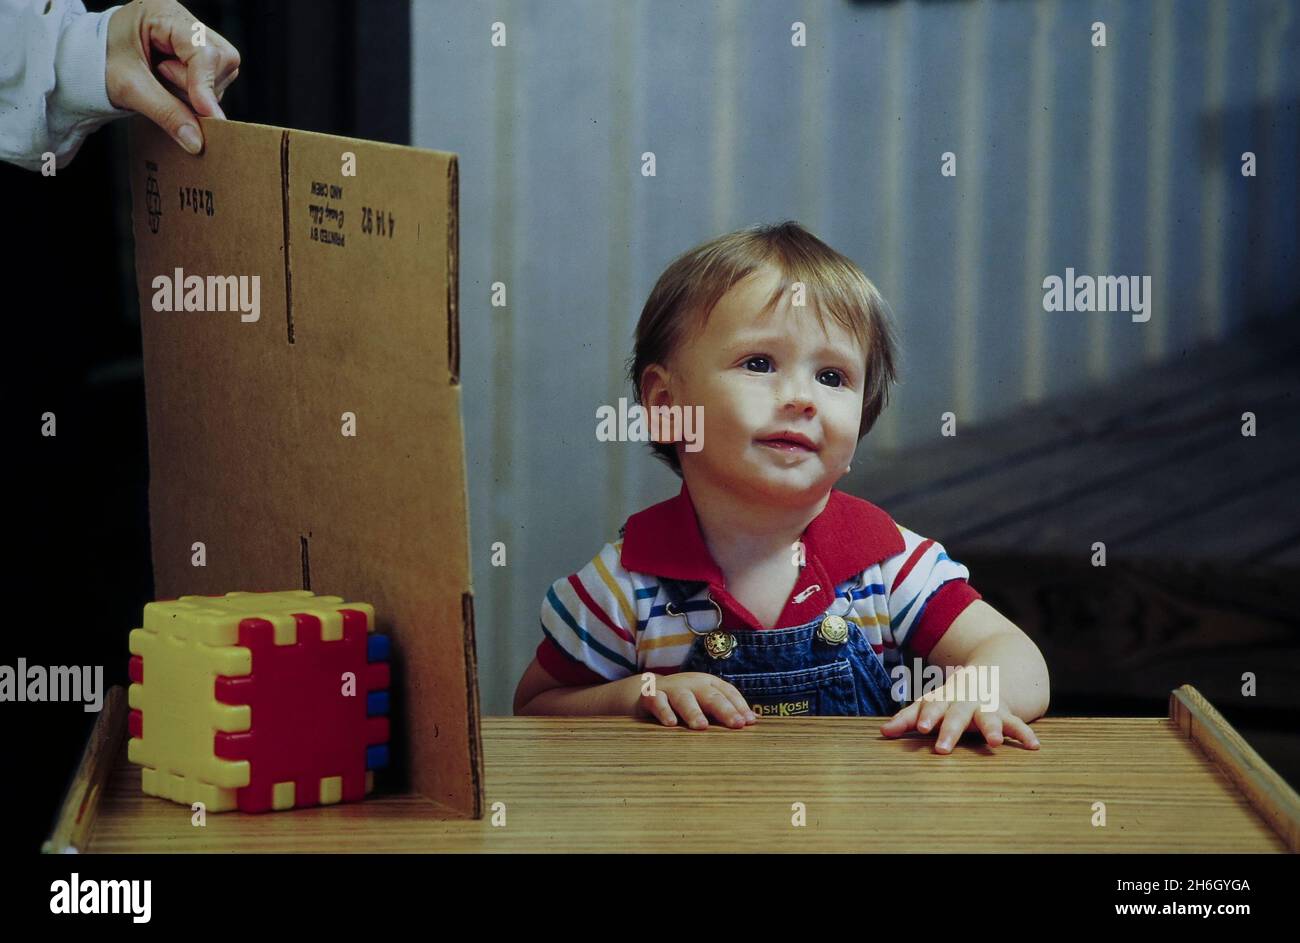 Austin Texas USA, 1995: Child development: 10-month old baby boy shows lack of 'object permanence' during an experiment in a college laboratory, as a lab assistant hides a toy behind a piece of cardboard.  MR EC-0000  ©Bob Daemmrich Stock Photo